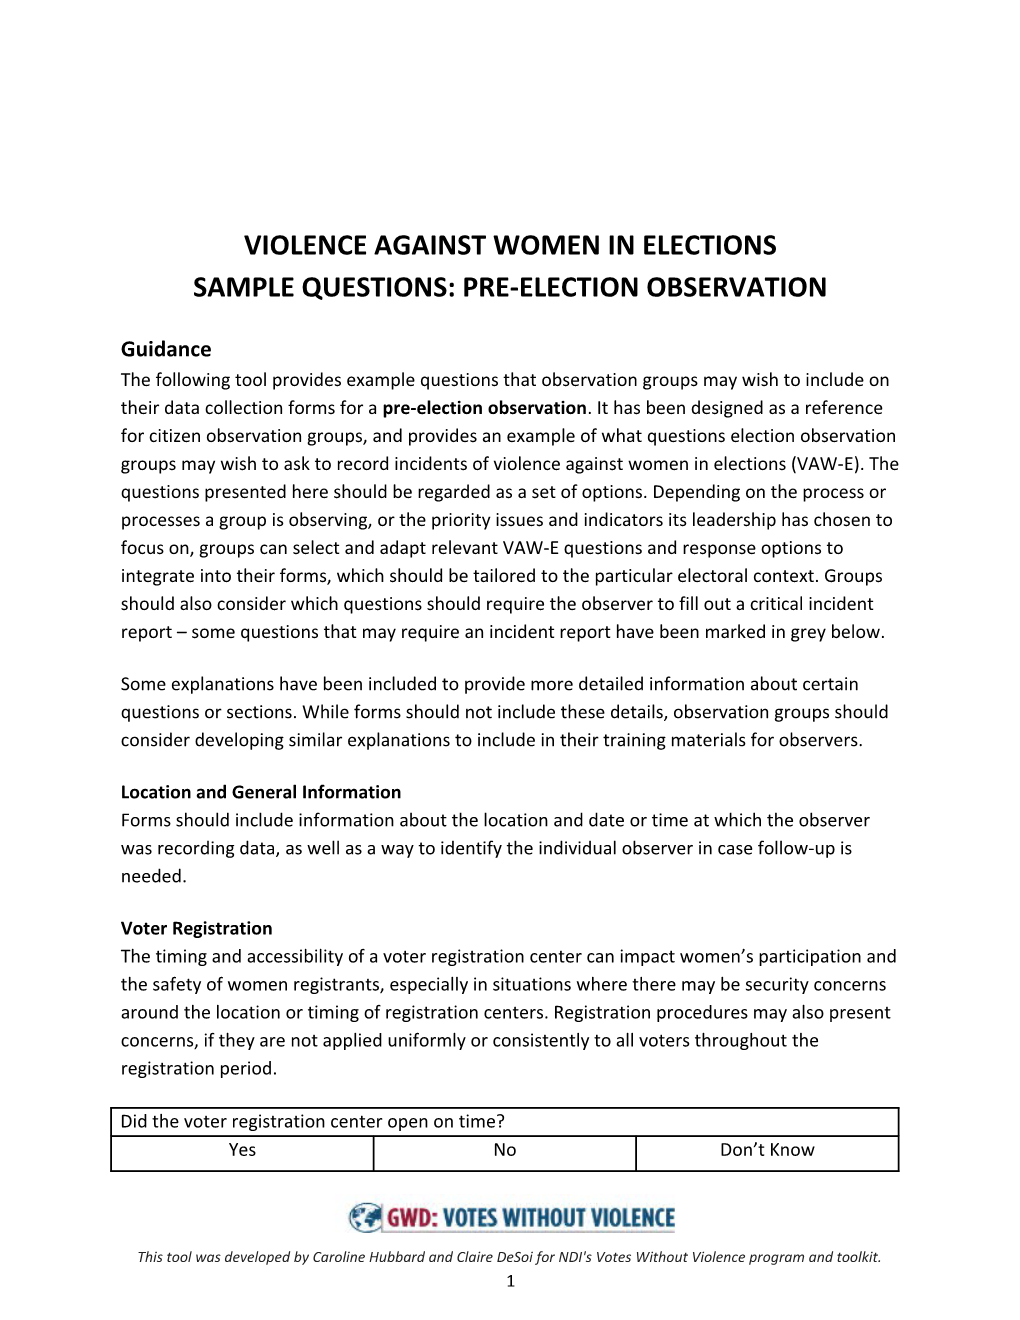 Violence Against Women in Elections